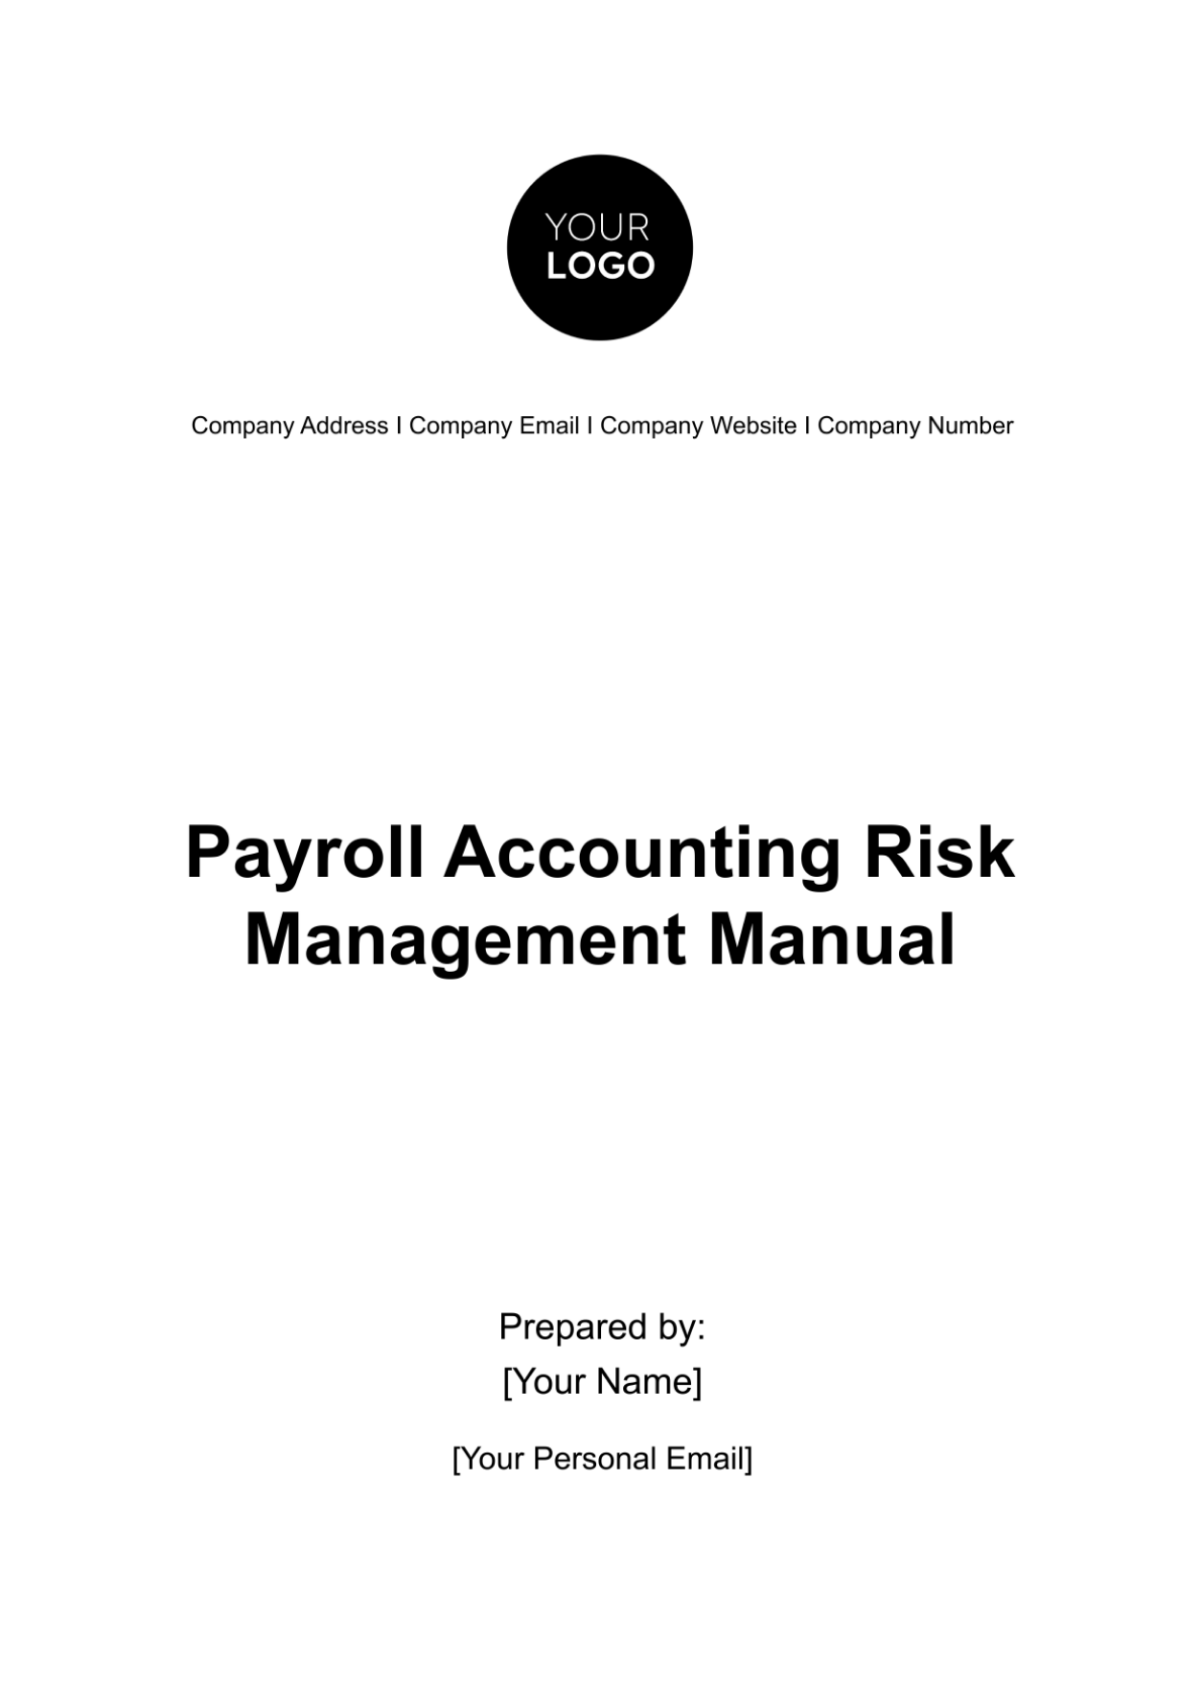 Payroll Accounting Risk Management Manual Template